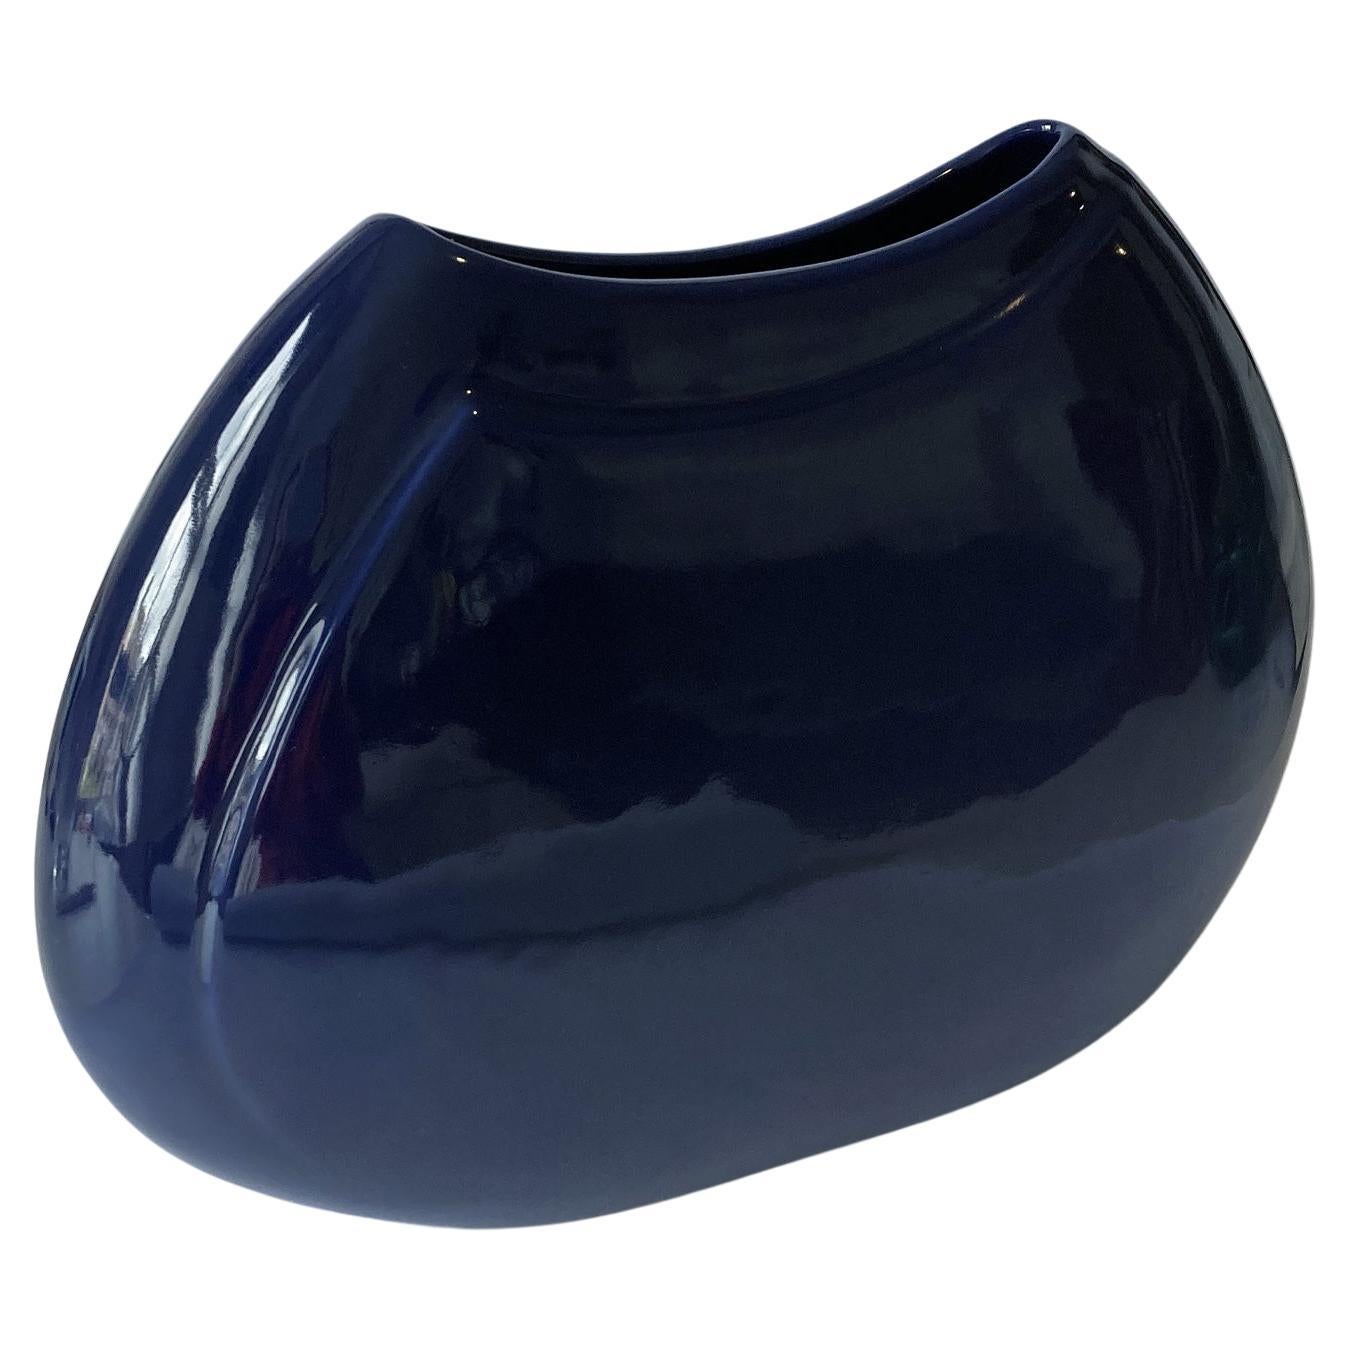 Haeger Navy Blue Abstract Rounded Vase, Postmodern